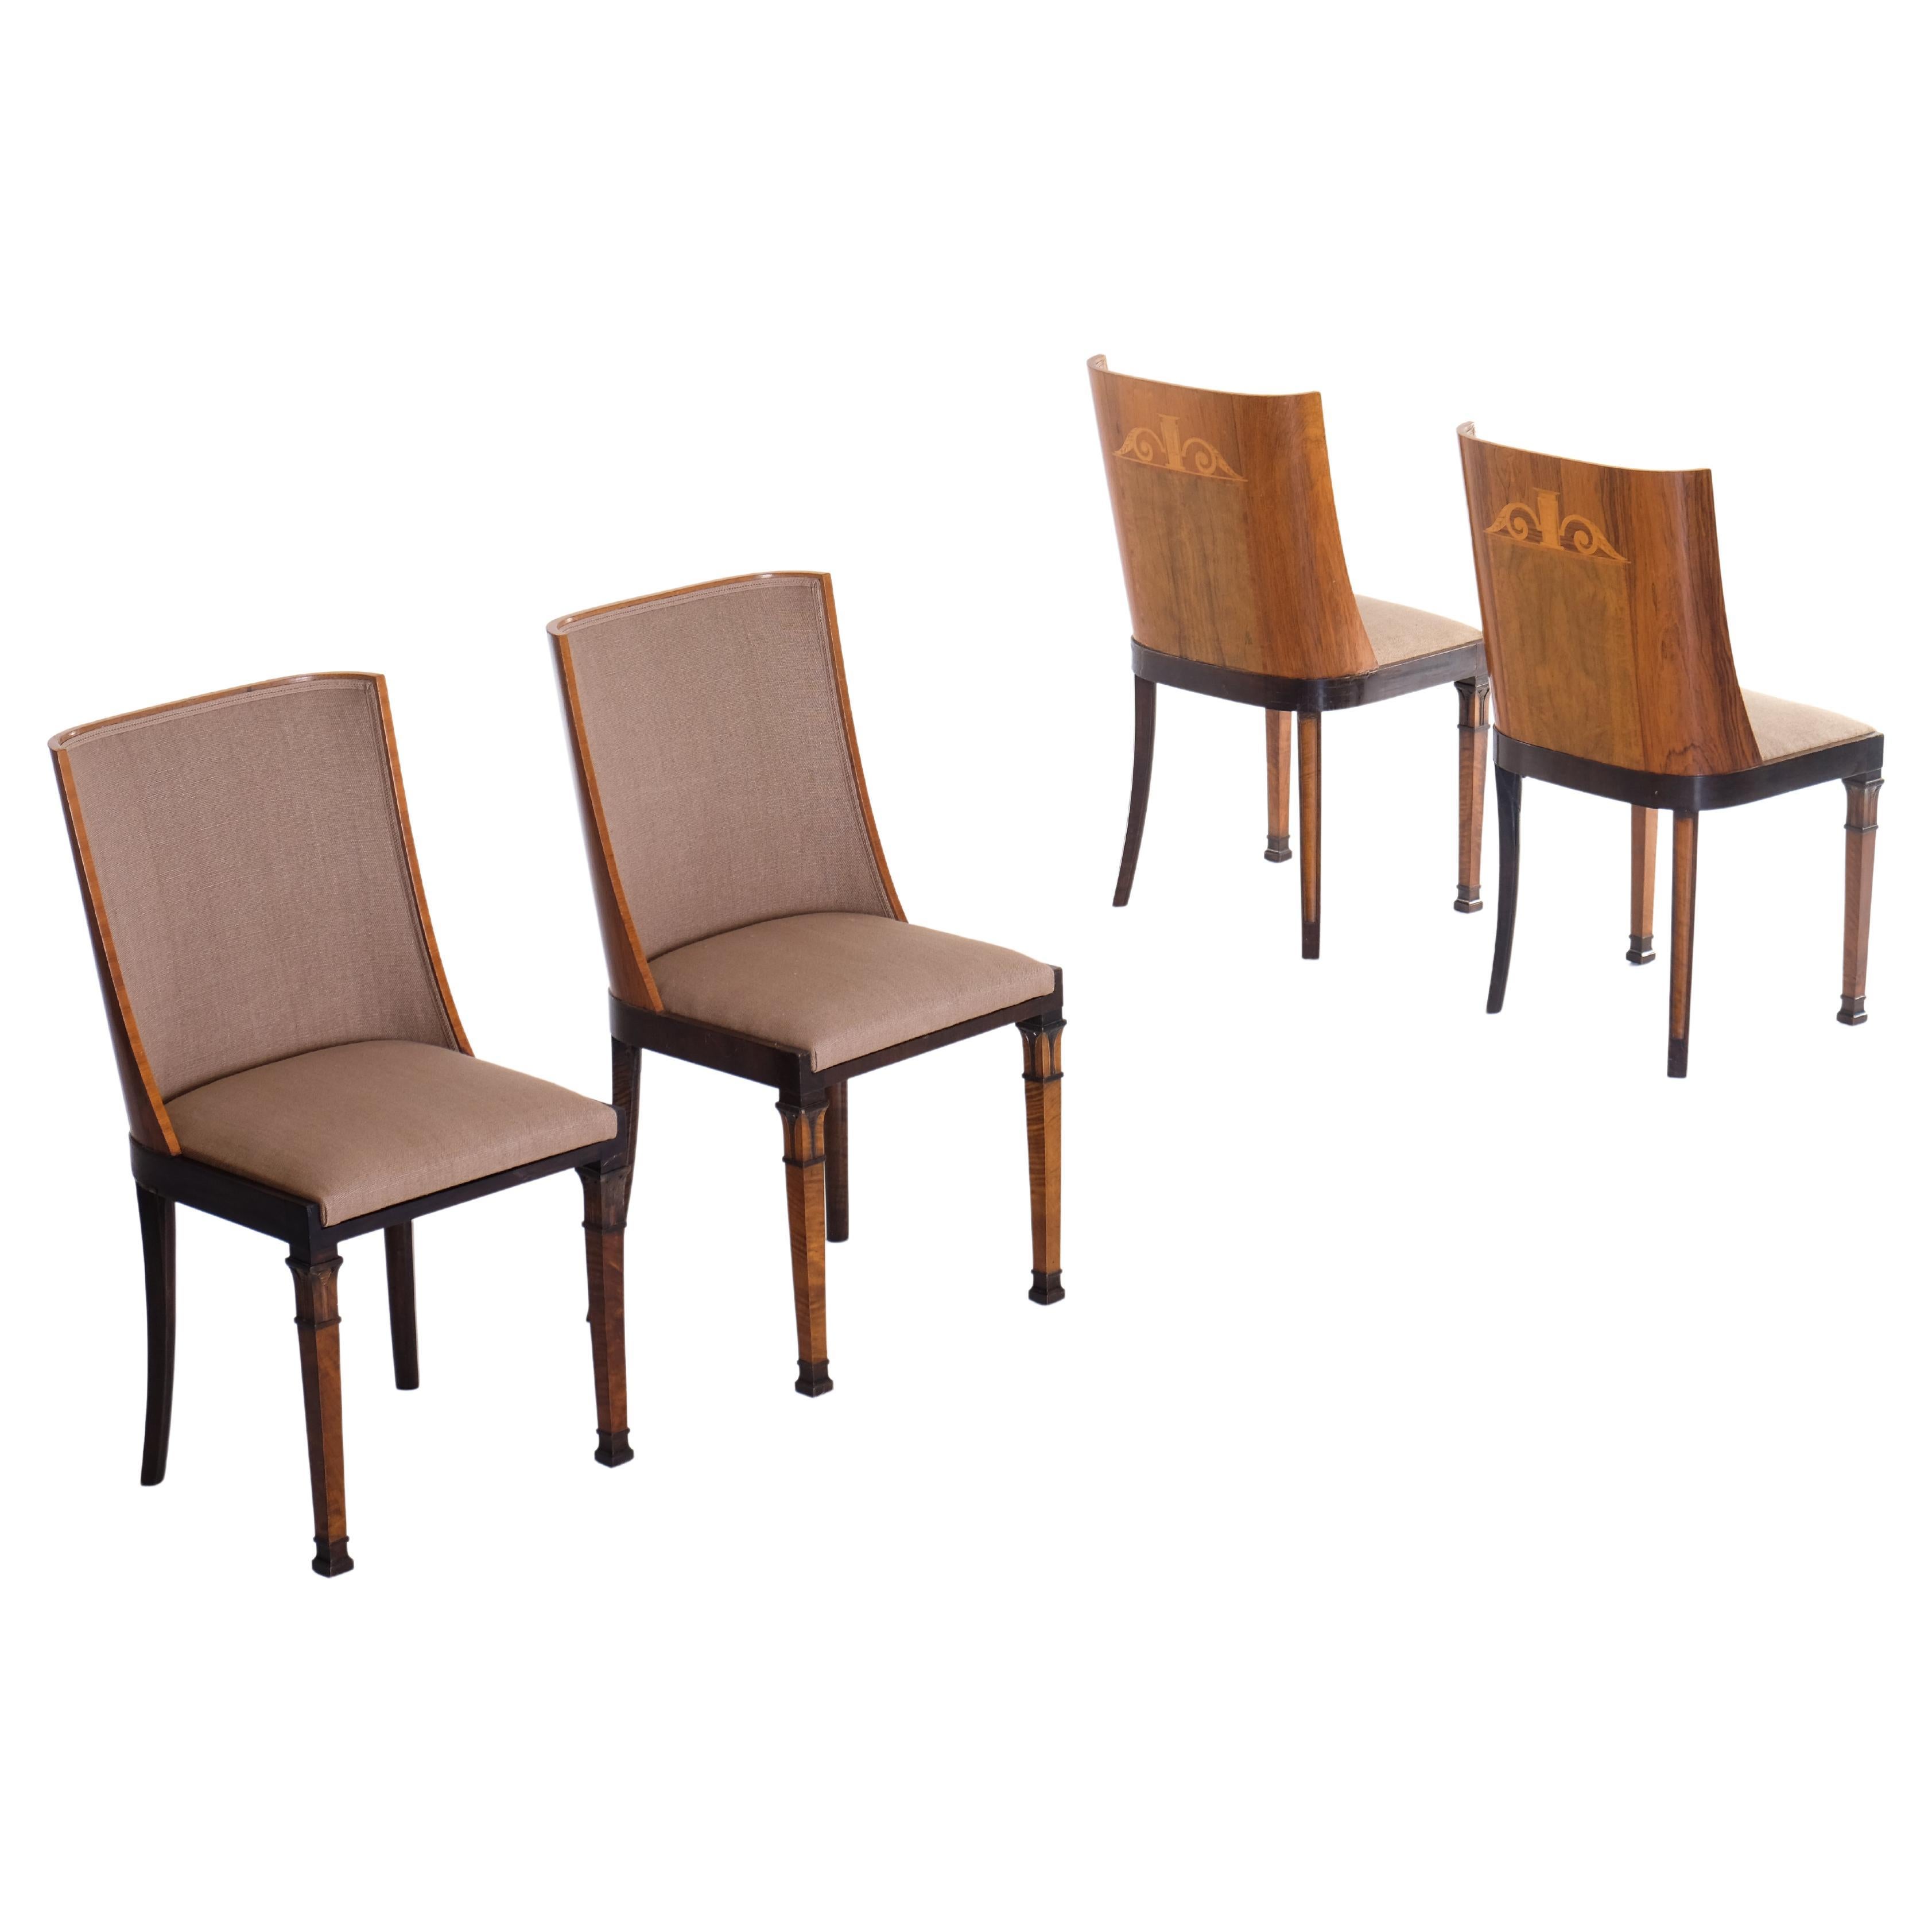 Set of 4 Chairs Attributed to Carl Bergsten, Sweden, 1920s For Sale